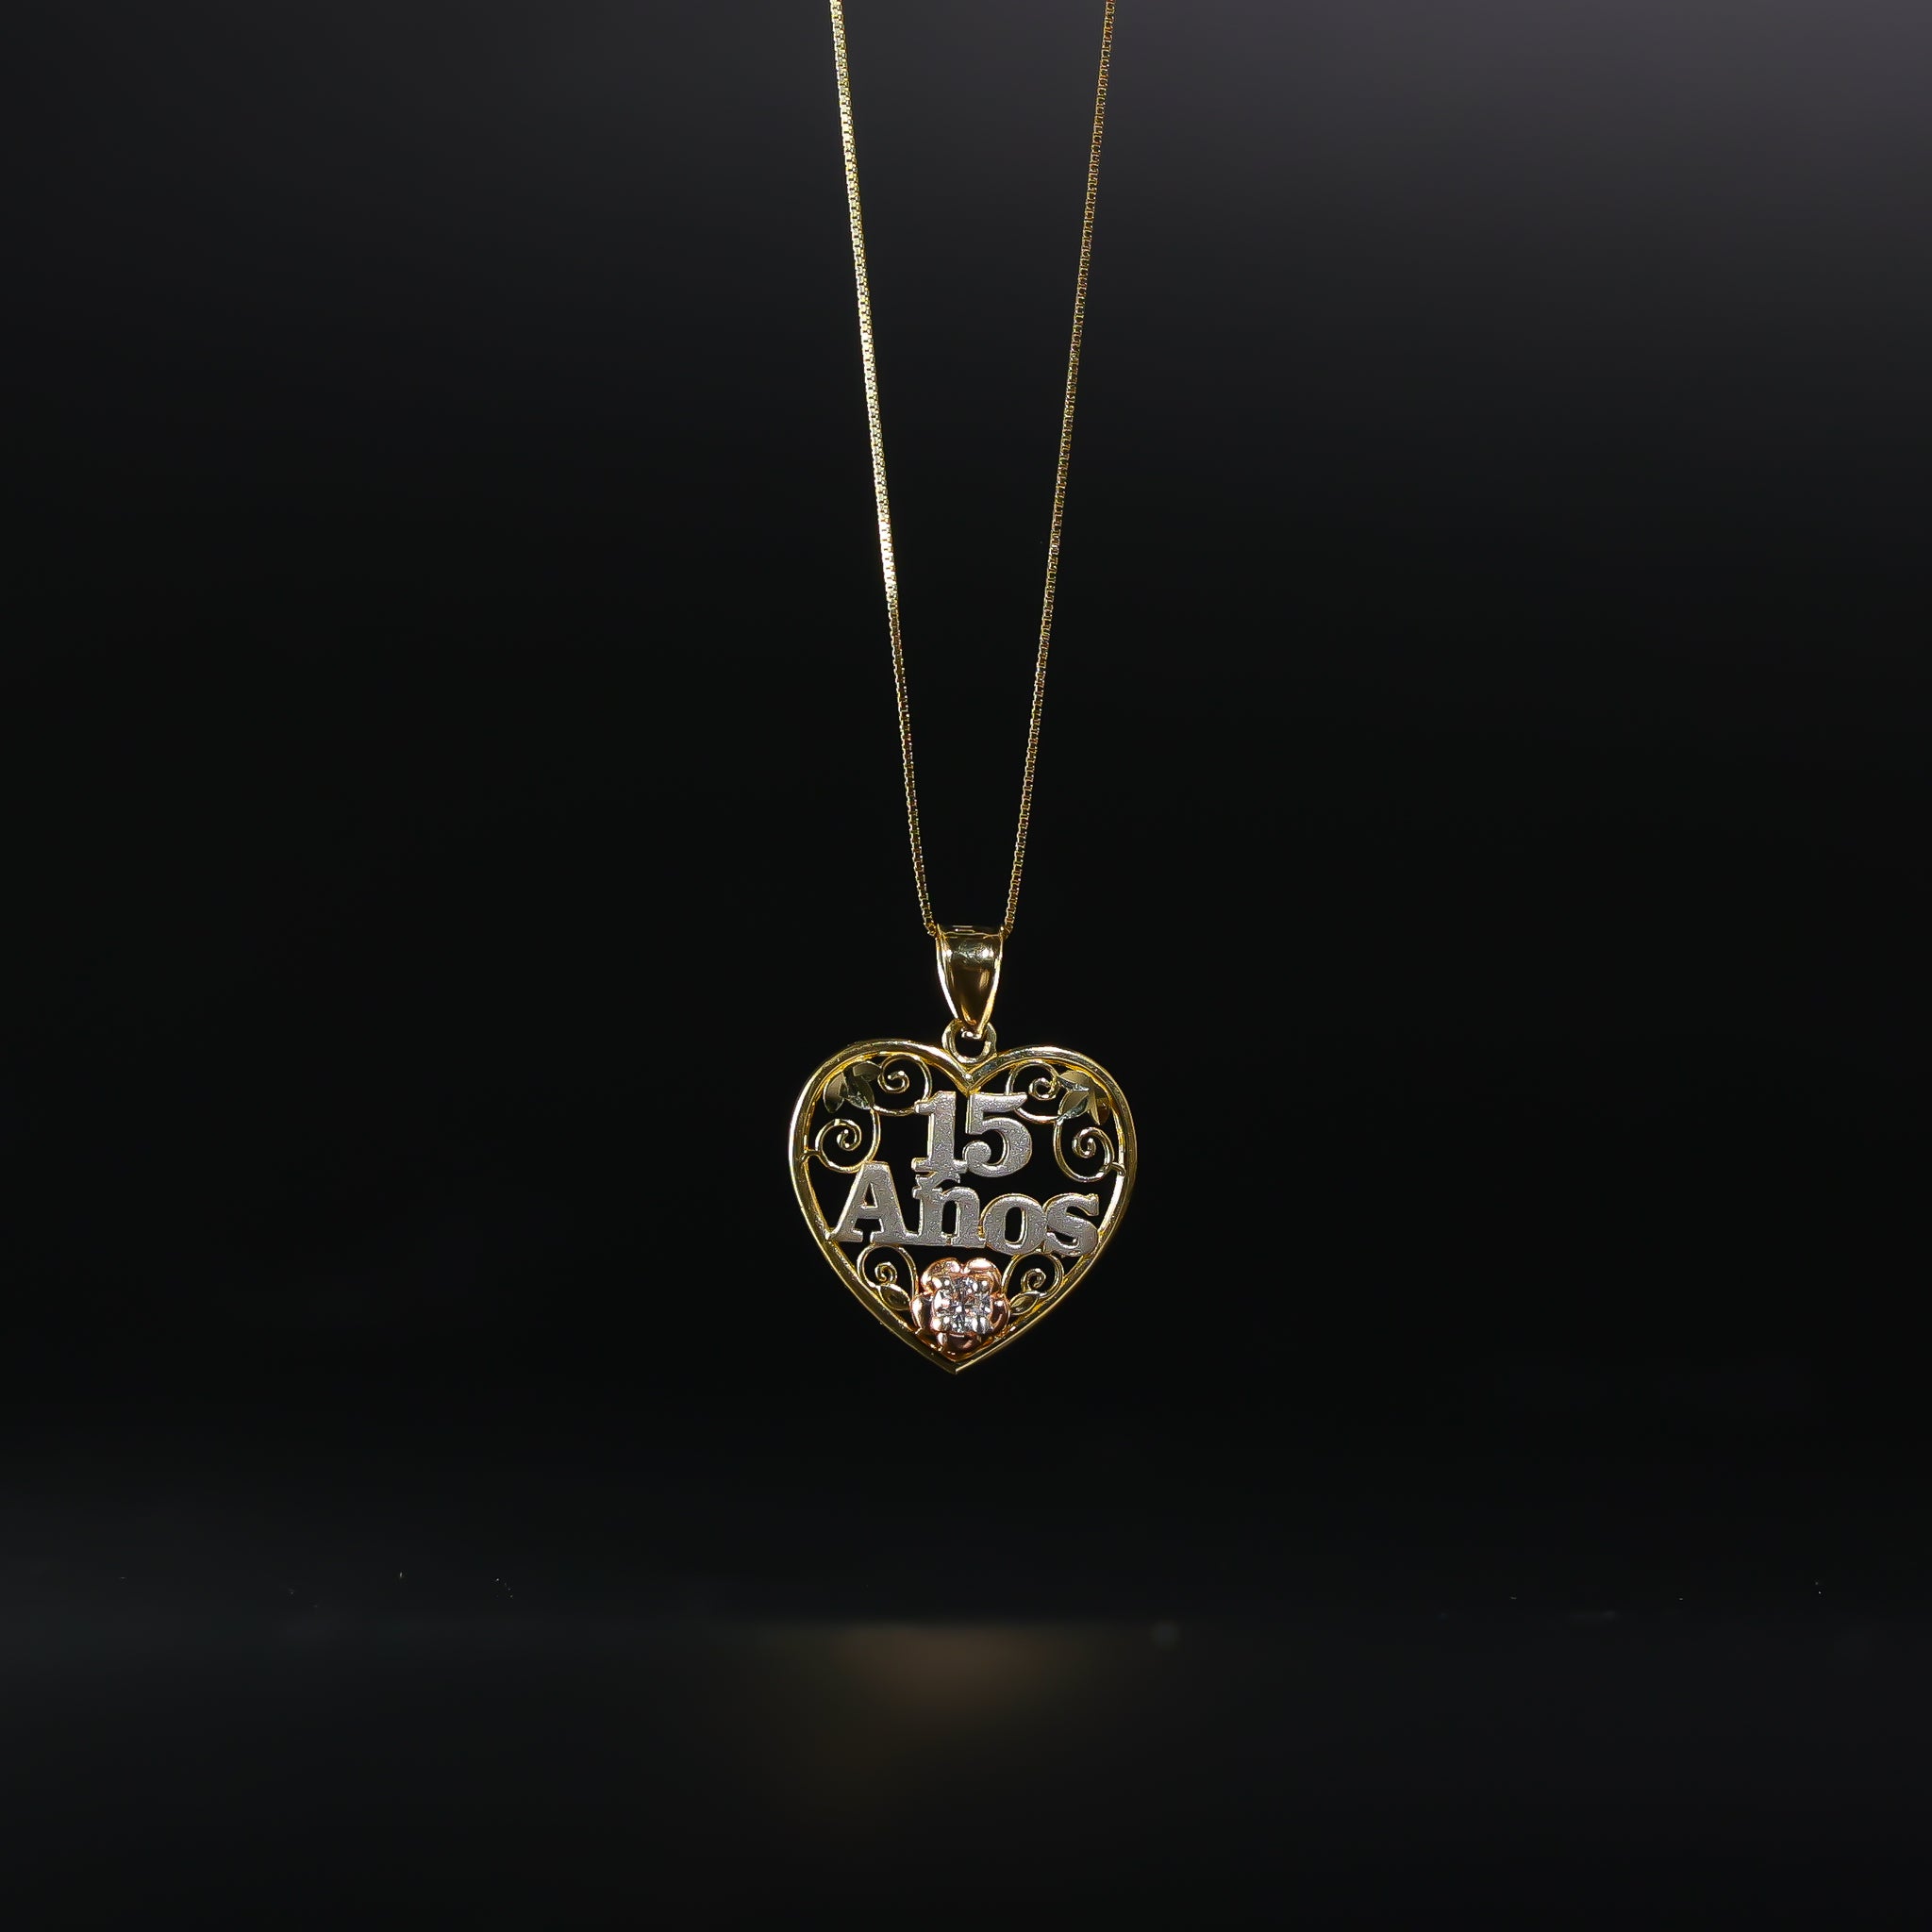 Charlie and Co Jewelry | Gold Sweet 15 Heart Pendant Three-Tones | 14K Gold 15 Years Pendant Pendant + 22” Box Chain